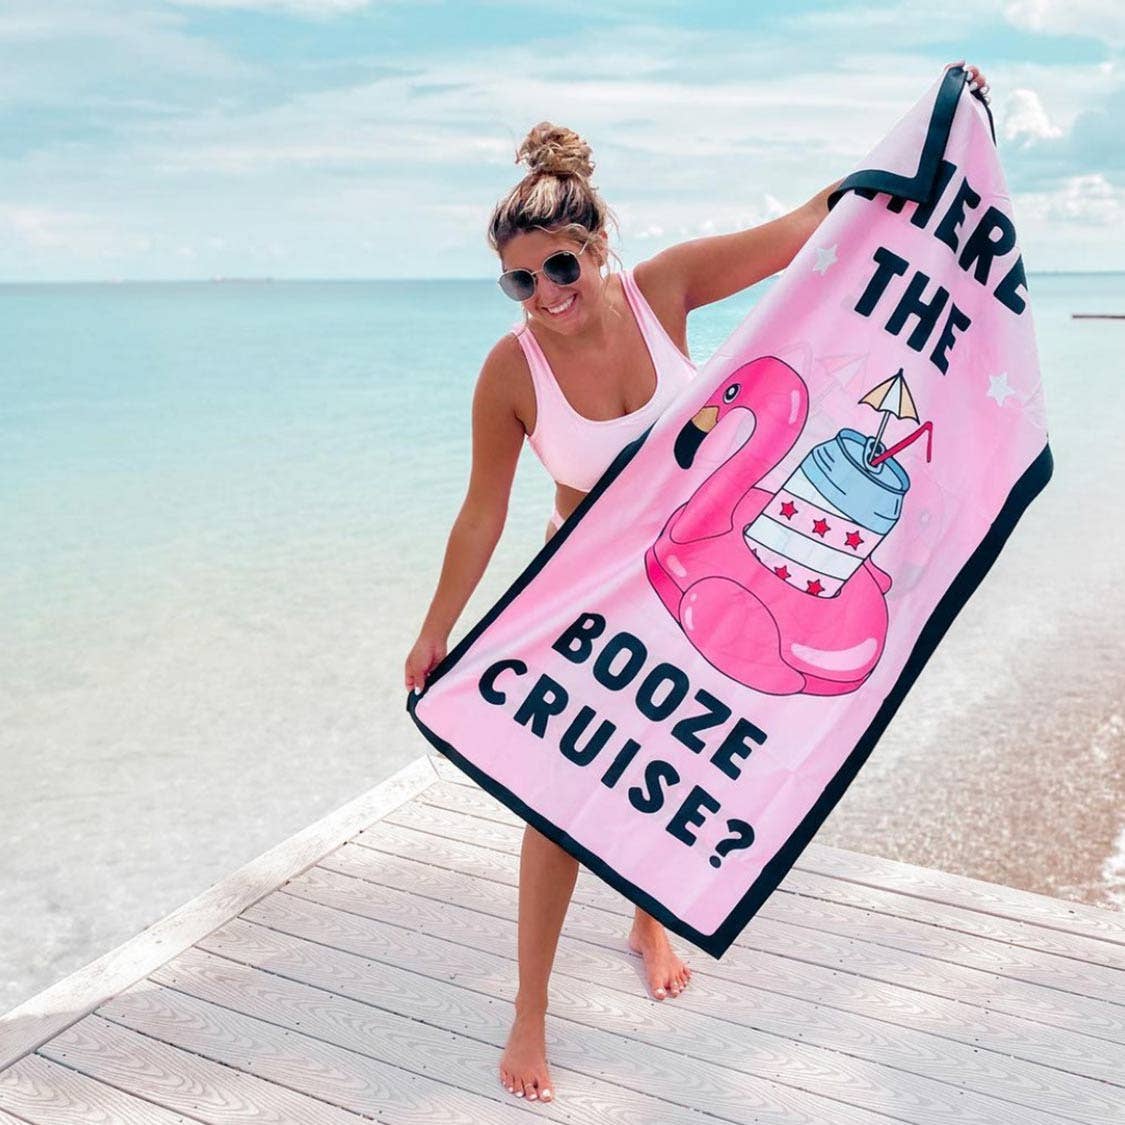 Katydid Where's The Booze Cruise Quick Dry Beach Towels